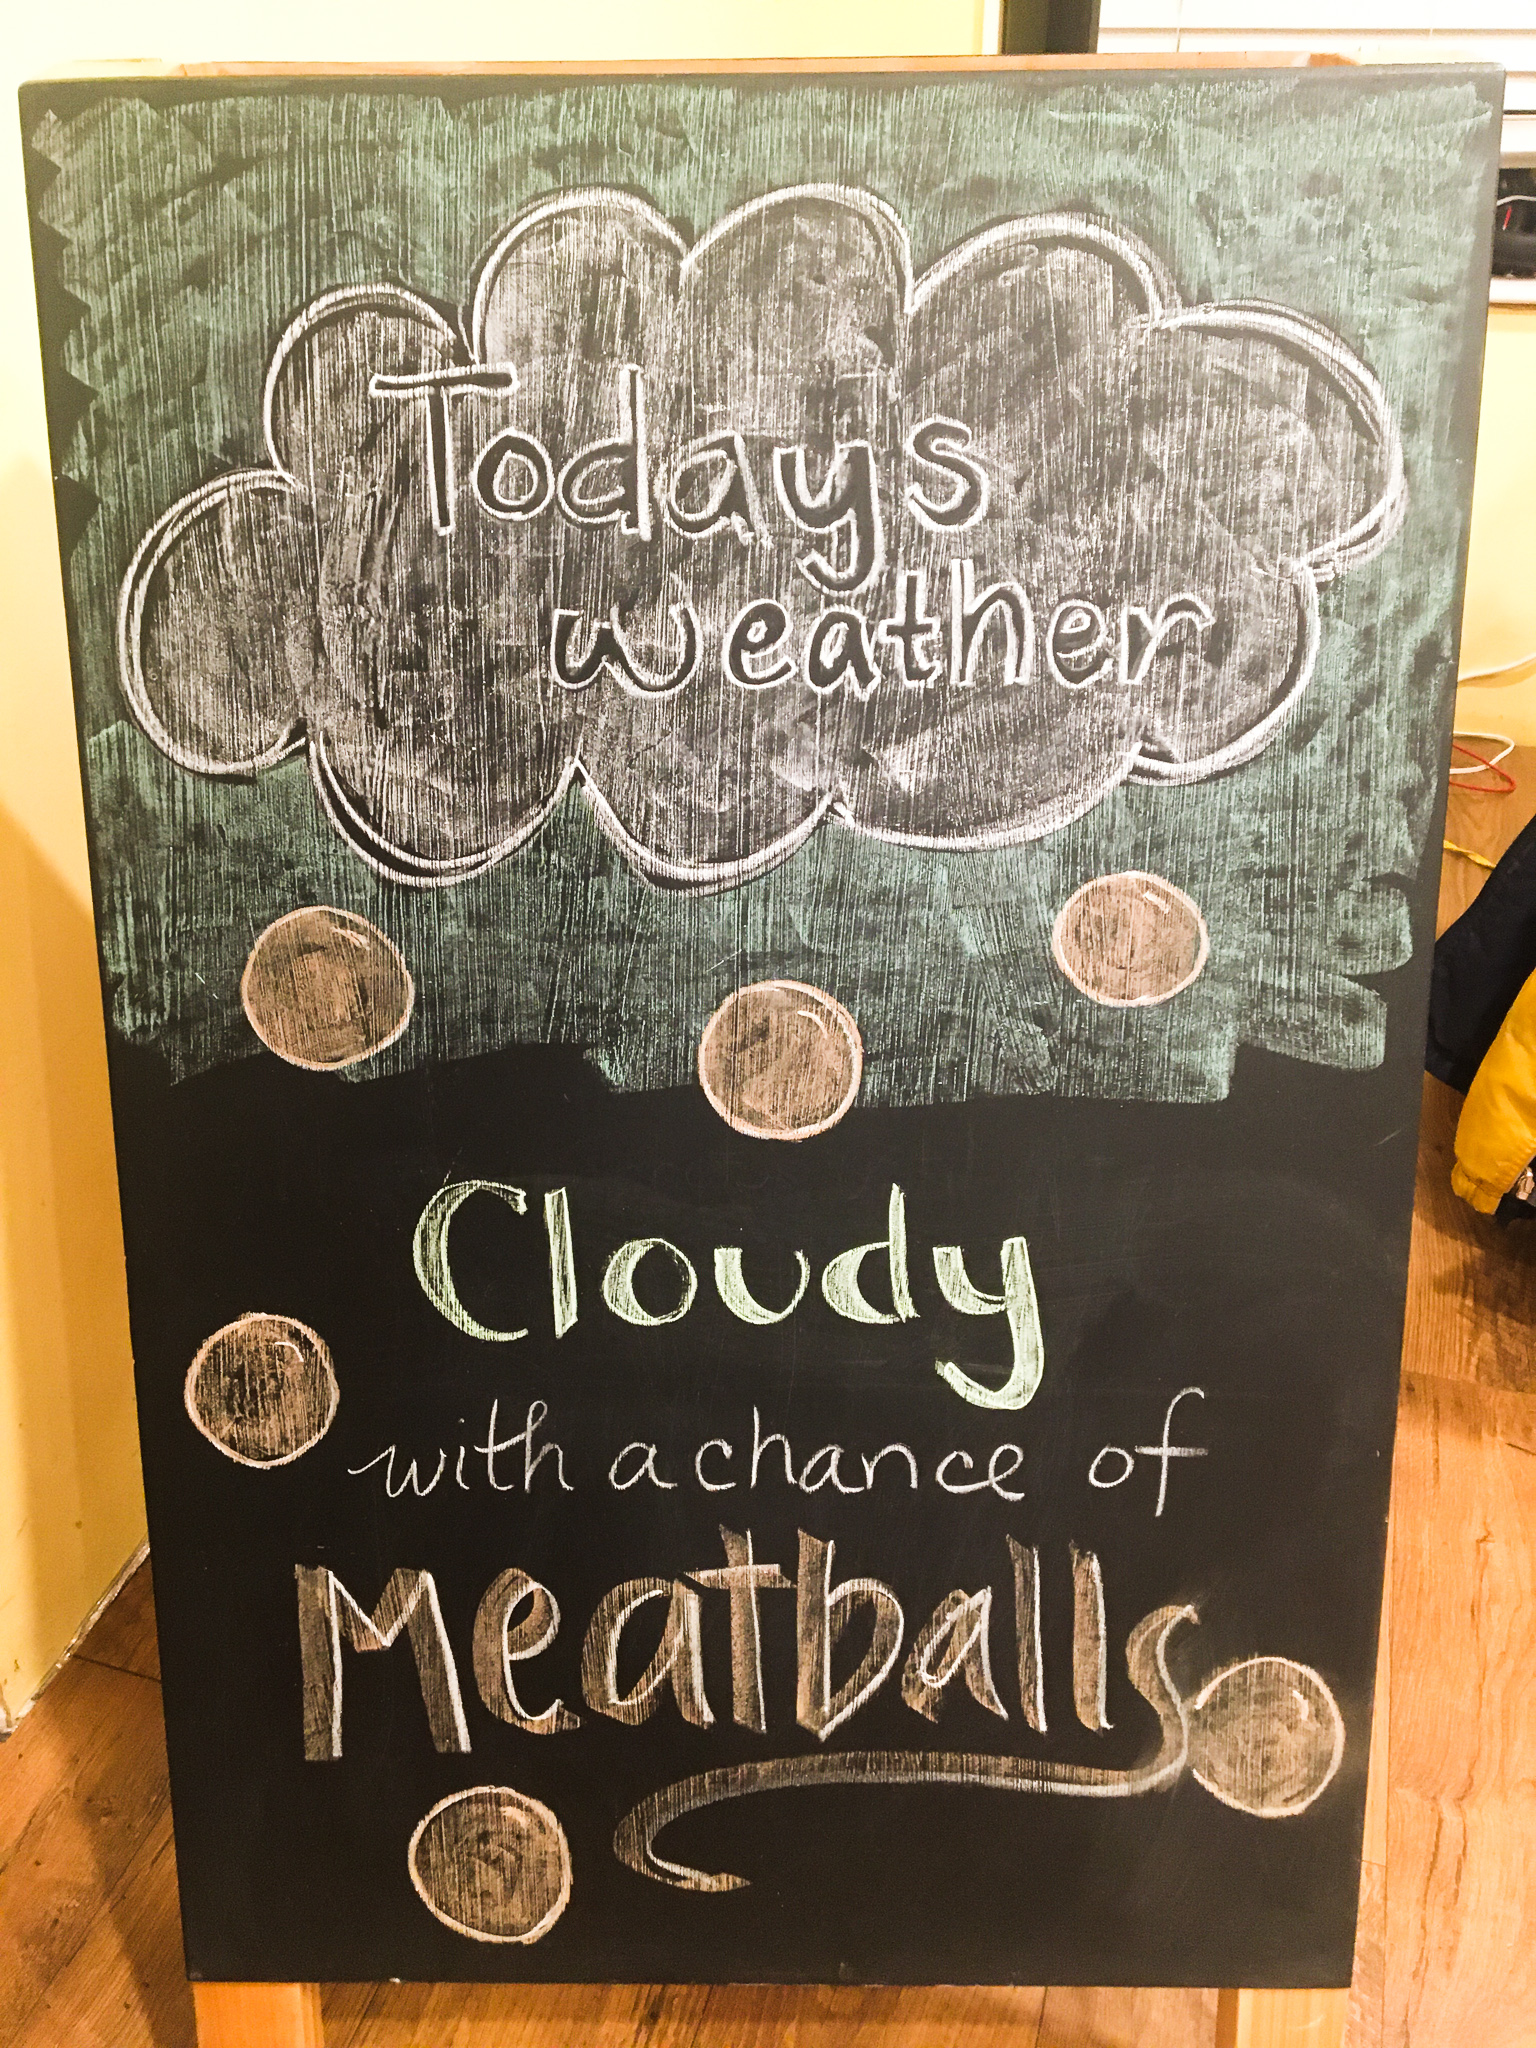 Simple Budget Friendly Party - Cloudy with a Chance of Meatballs | mamasbrush

Chalkboard for today's weather, balloon clouds with food falling from the sky, giant pizza, giant food cake, and more in this Cloudy with a Chance of Meatballs birthday party theme!